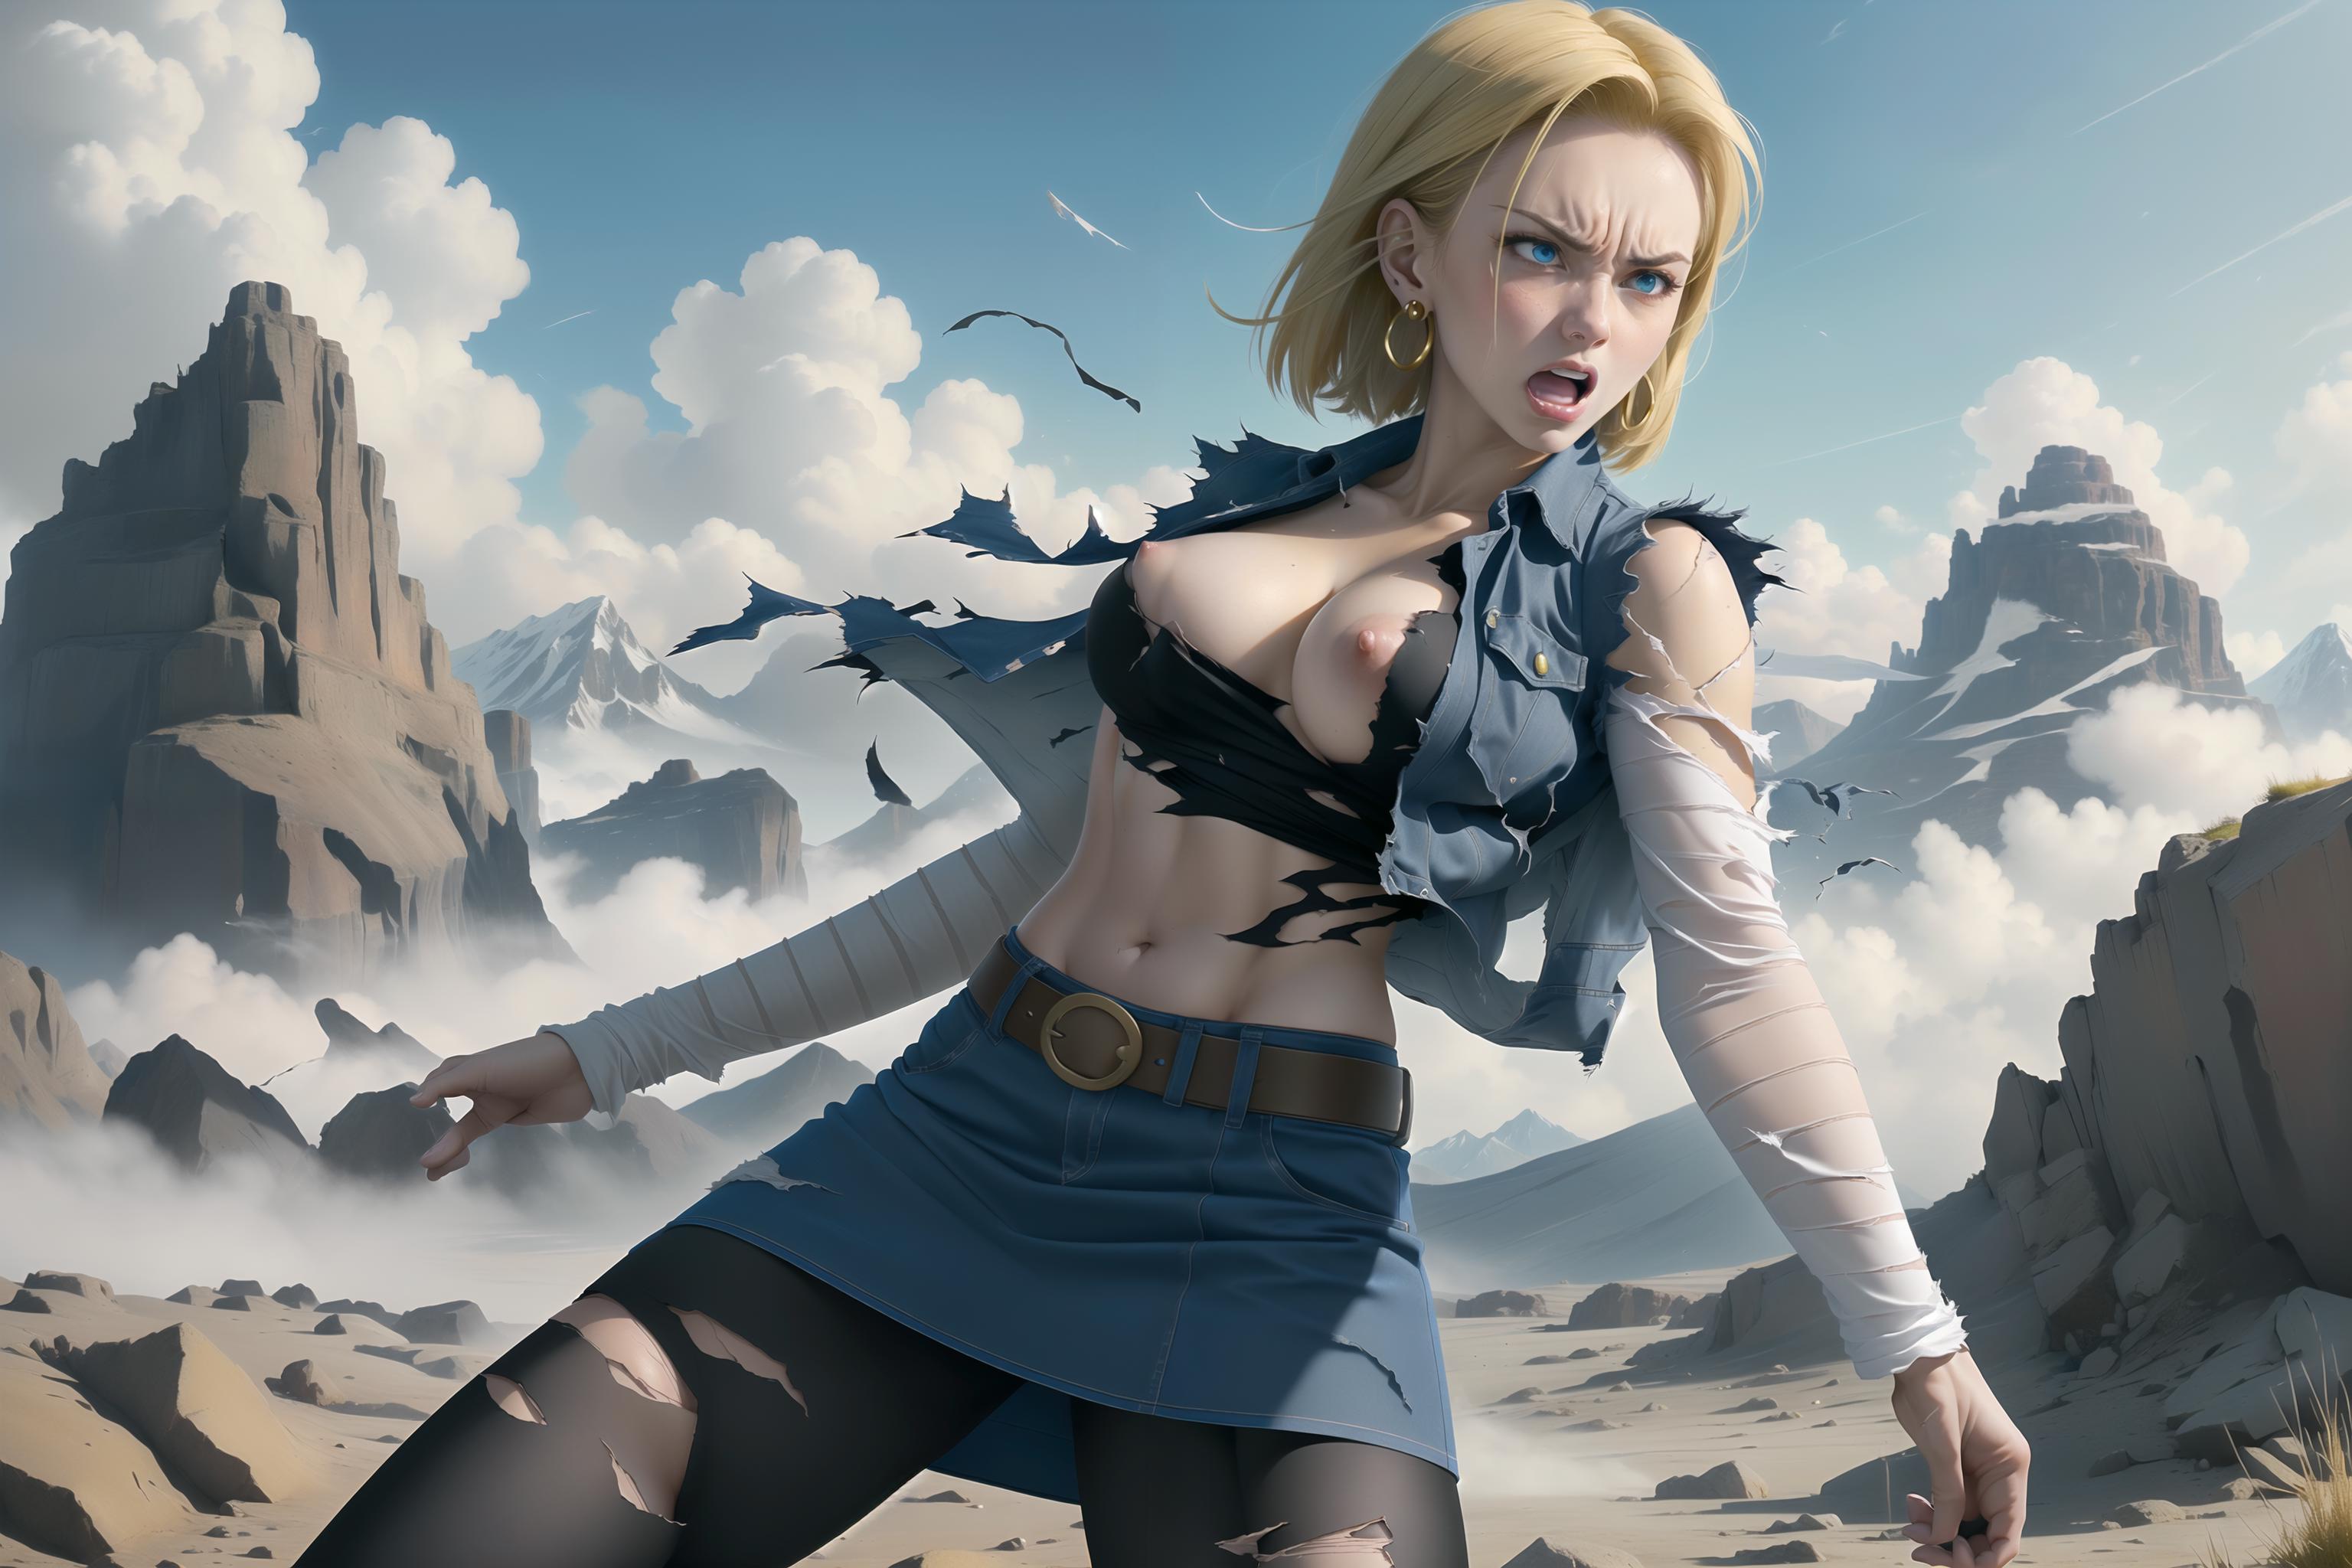 Android 18 人造人間18号 / Dragon Ball Z image by mra92